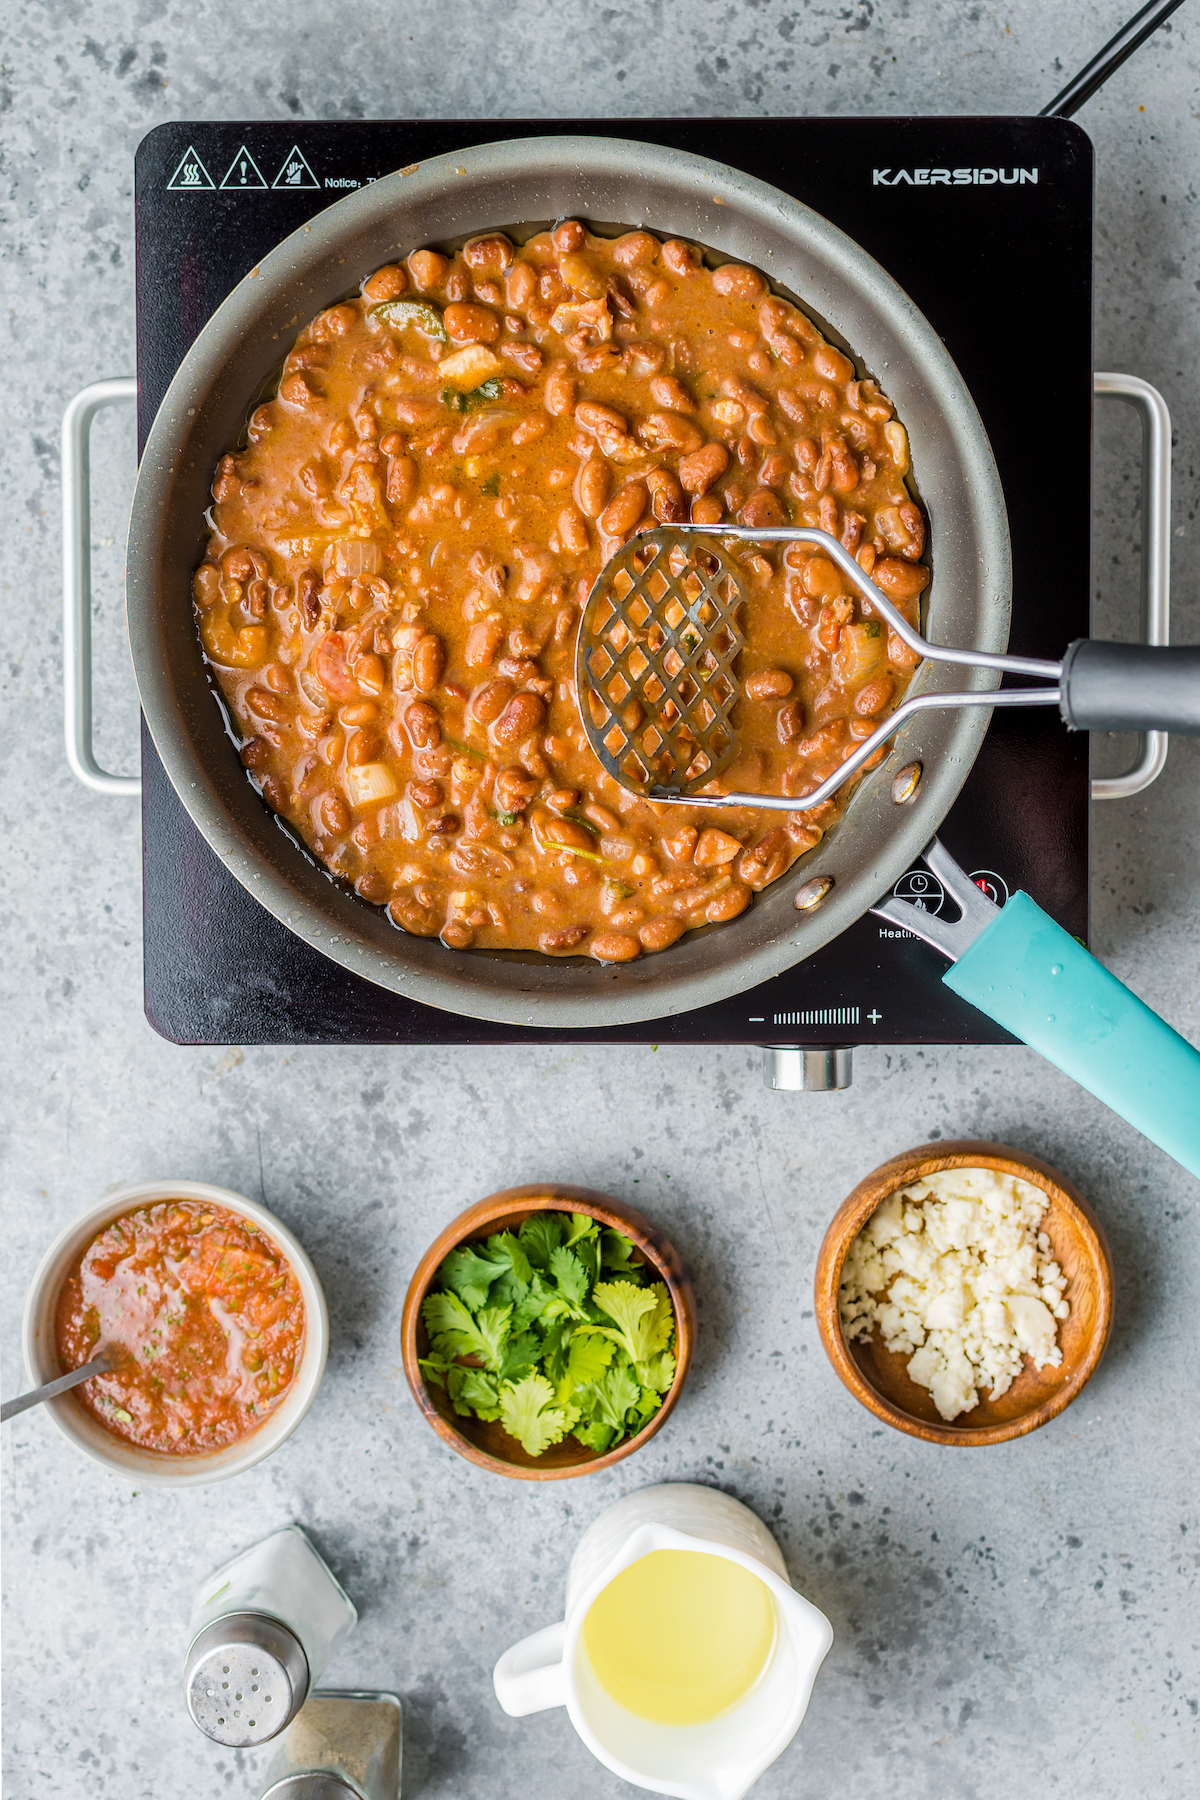 Beans cooking in a skillet. A potato masher is resting in the beans, and small dishes of salsa, cilantro, and queso fresco are nearby.